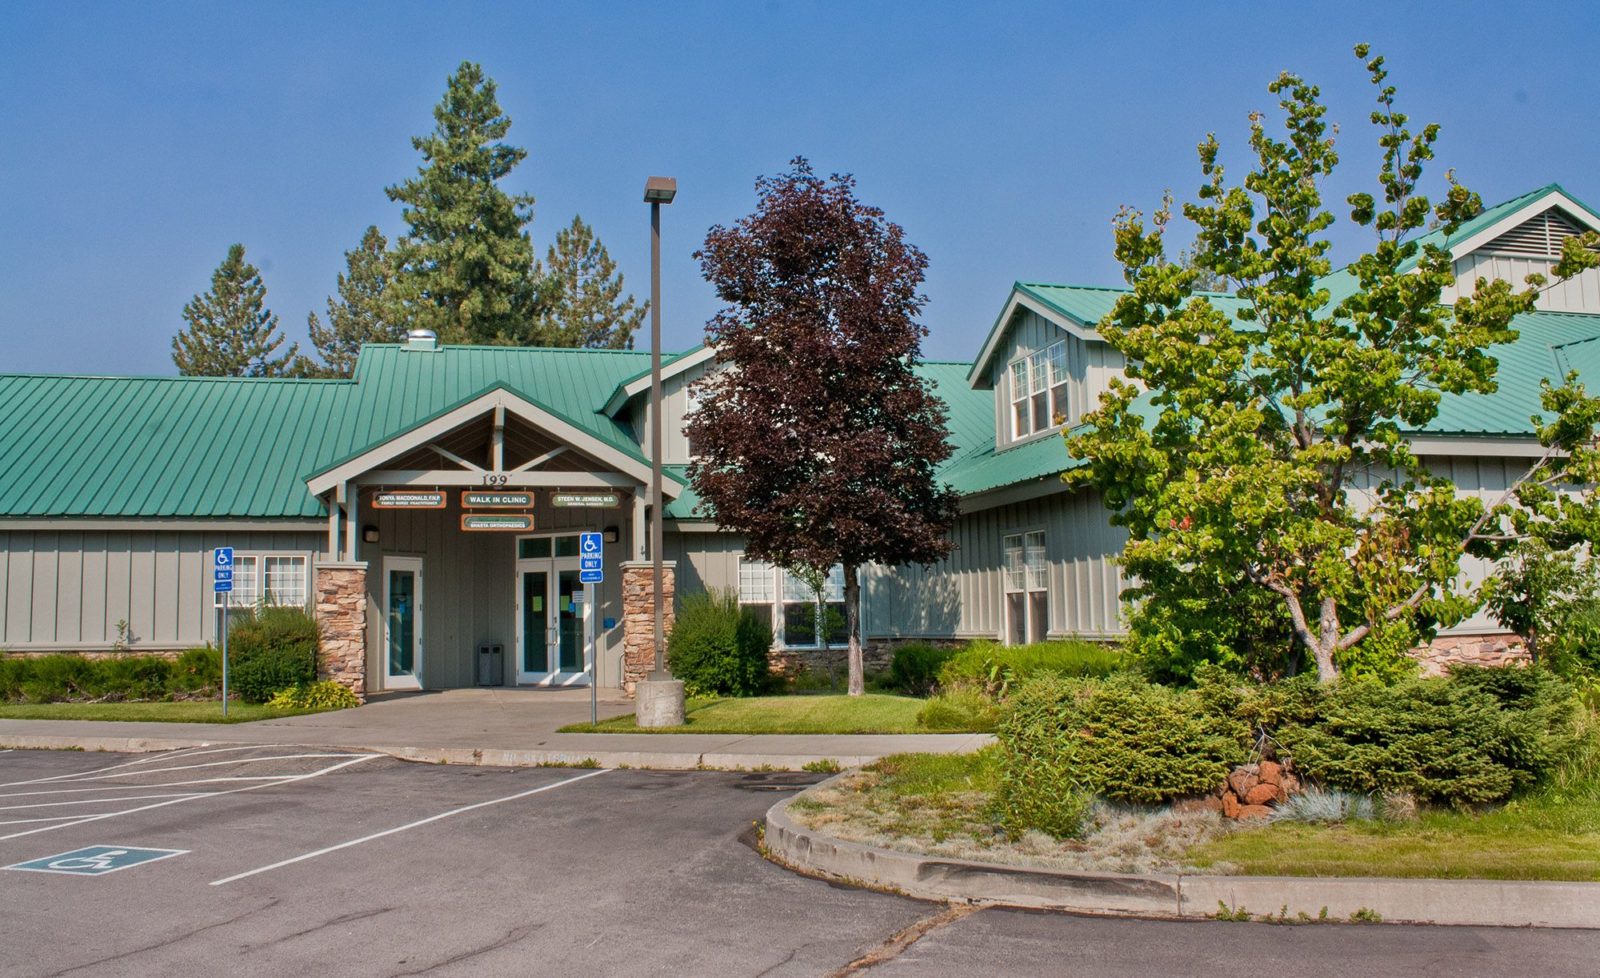 Exterior Image of the Almanor Clinic